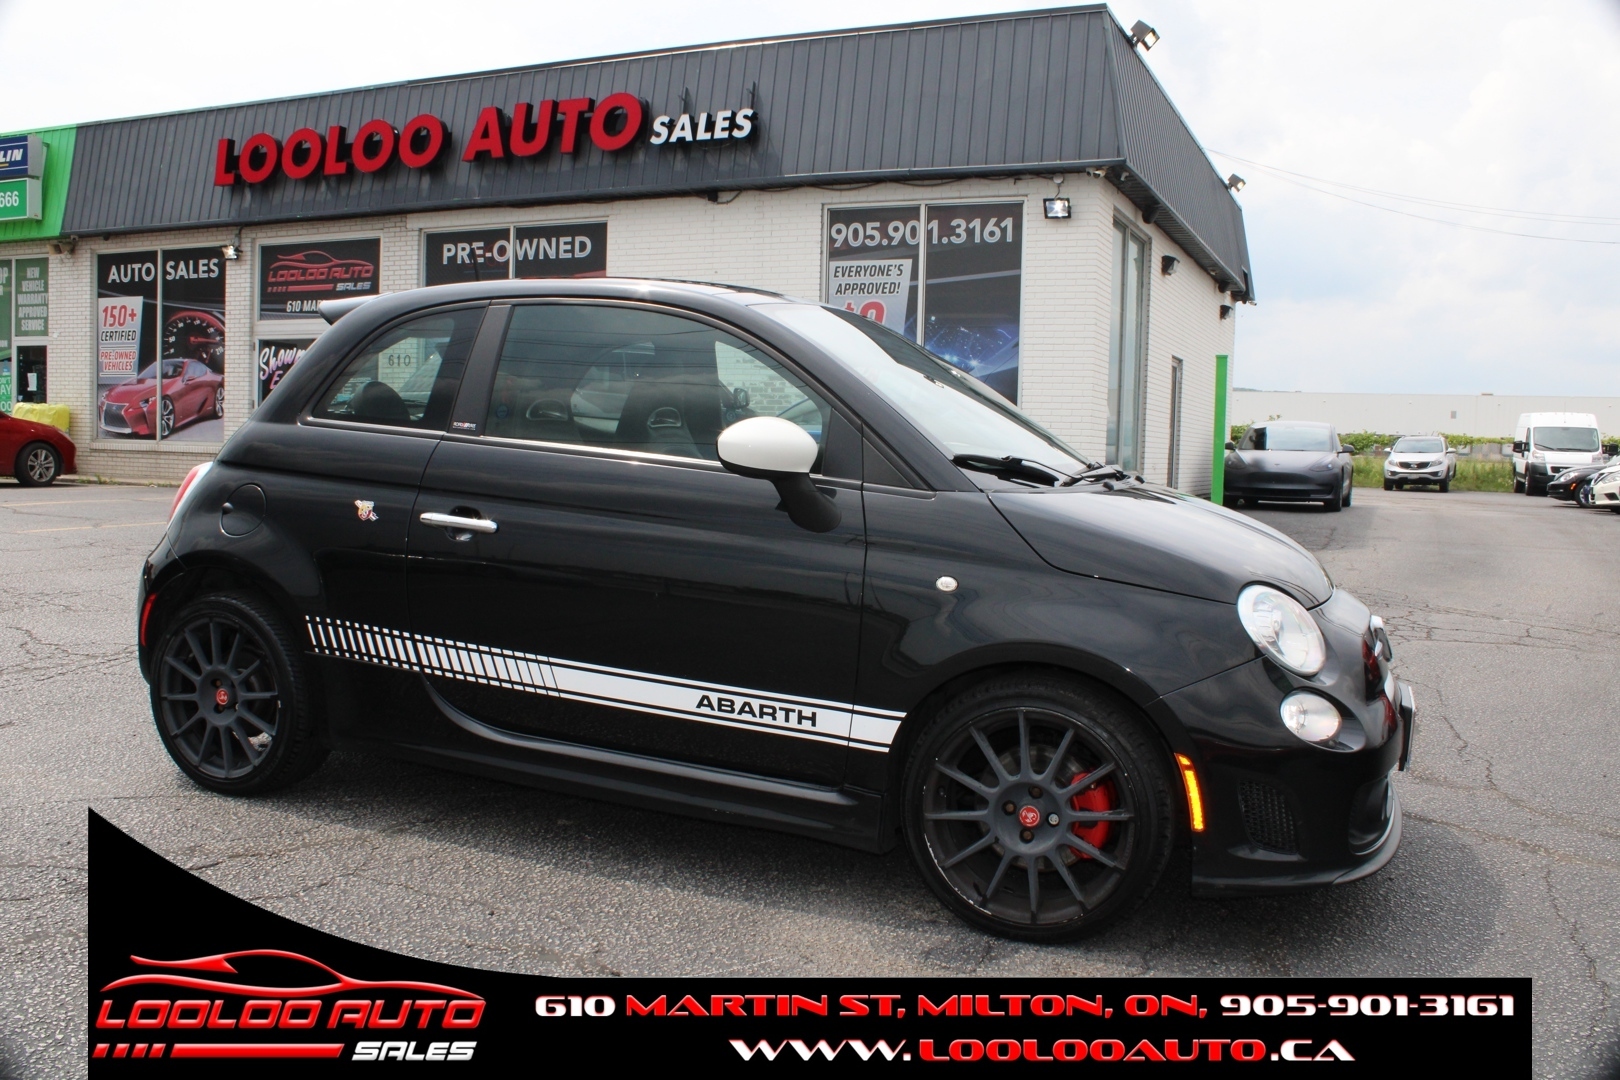 2012 Fiat 500 Abarth Leather 5 Speed Manual Certified